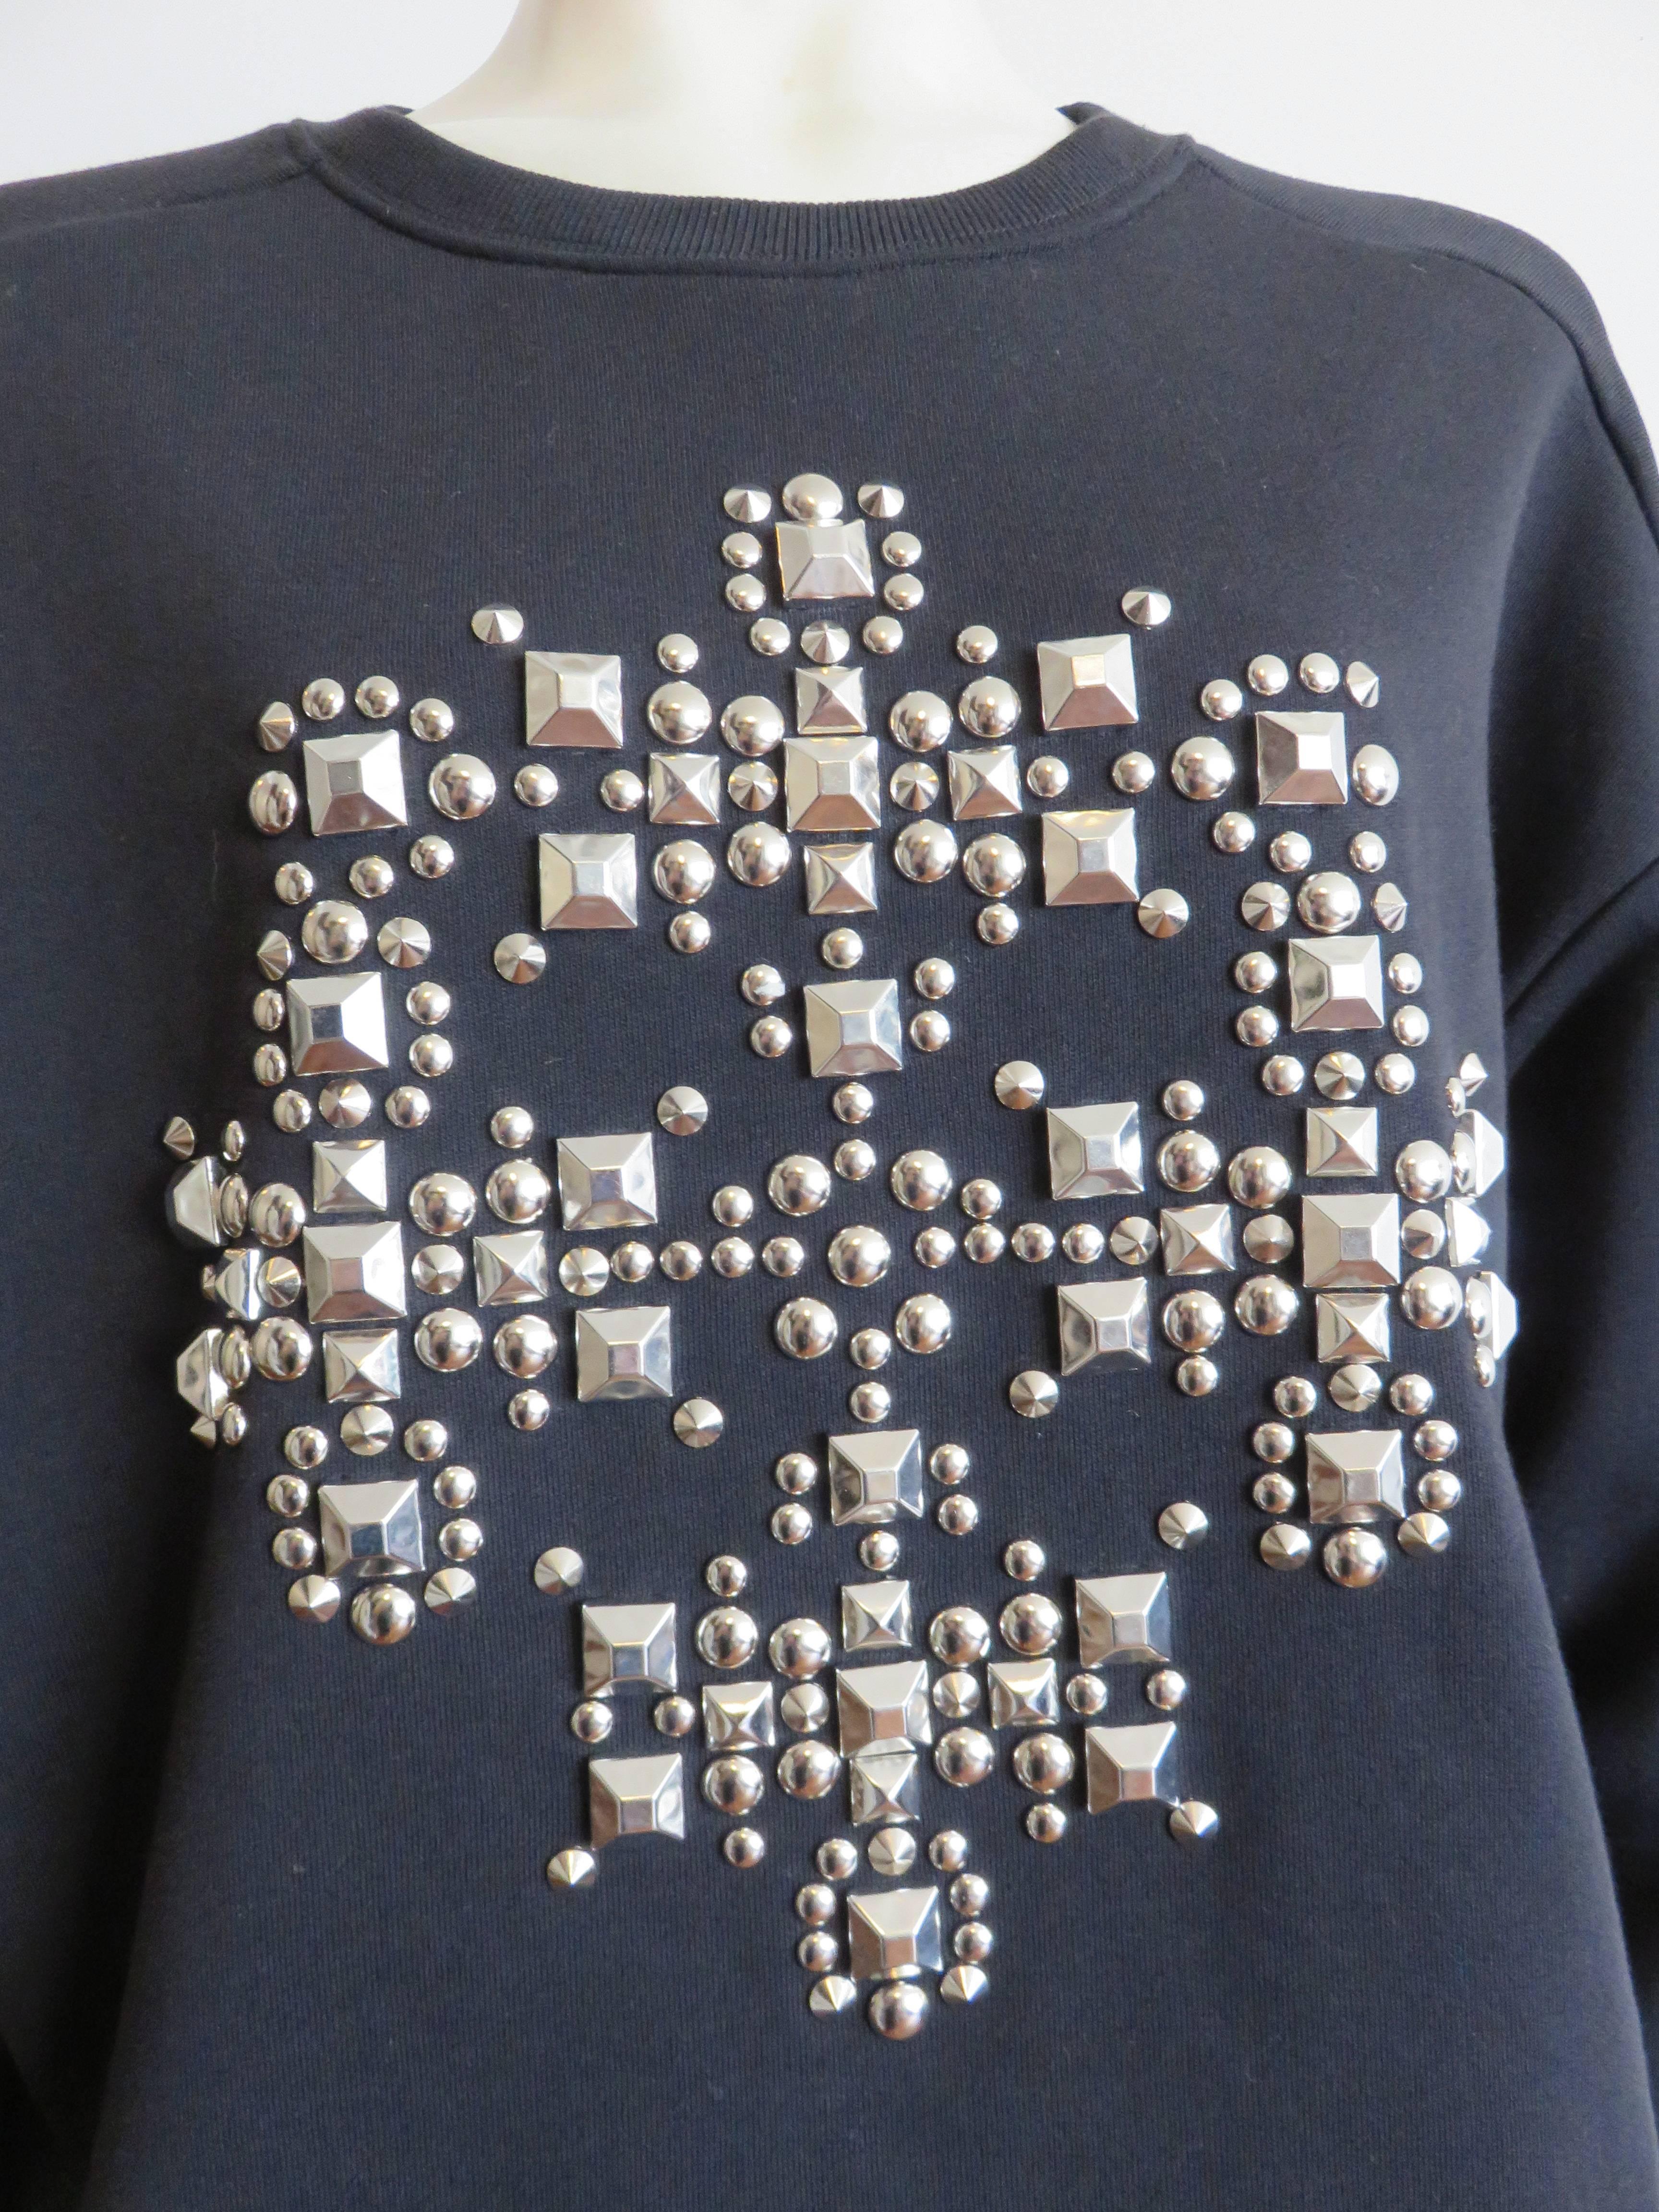 Worn once, 'like new' condition, Fall 2014 SAINT LAURENT PARIS by Hedi Slimane studded sweatshirt.

This amazing sweatshirt features polished metal, pyramid, cone, and stud nail heads in different sizes, composed in a cross shape